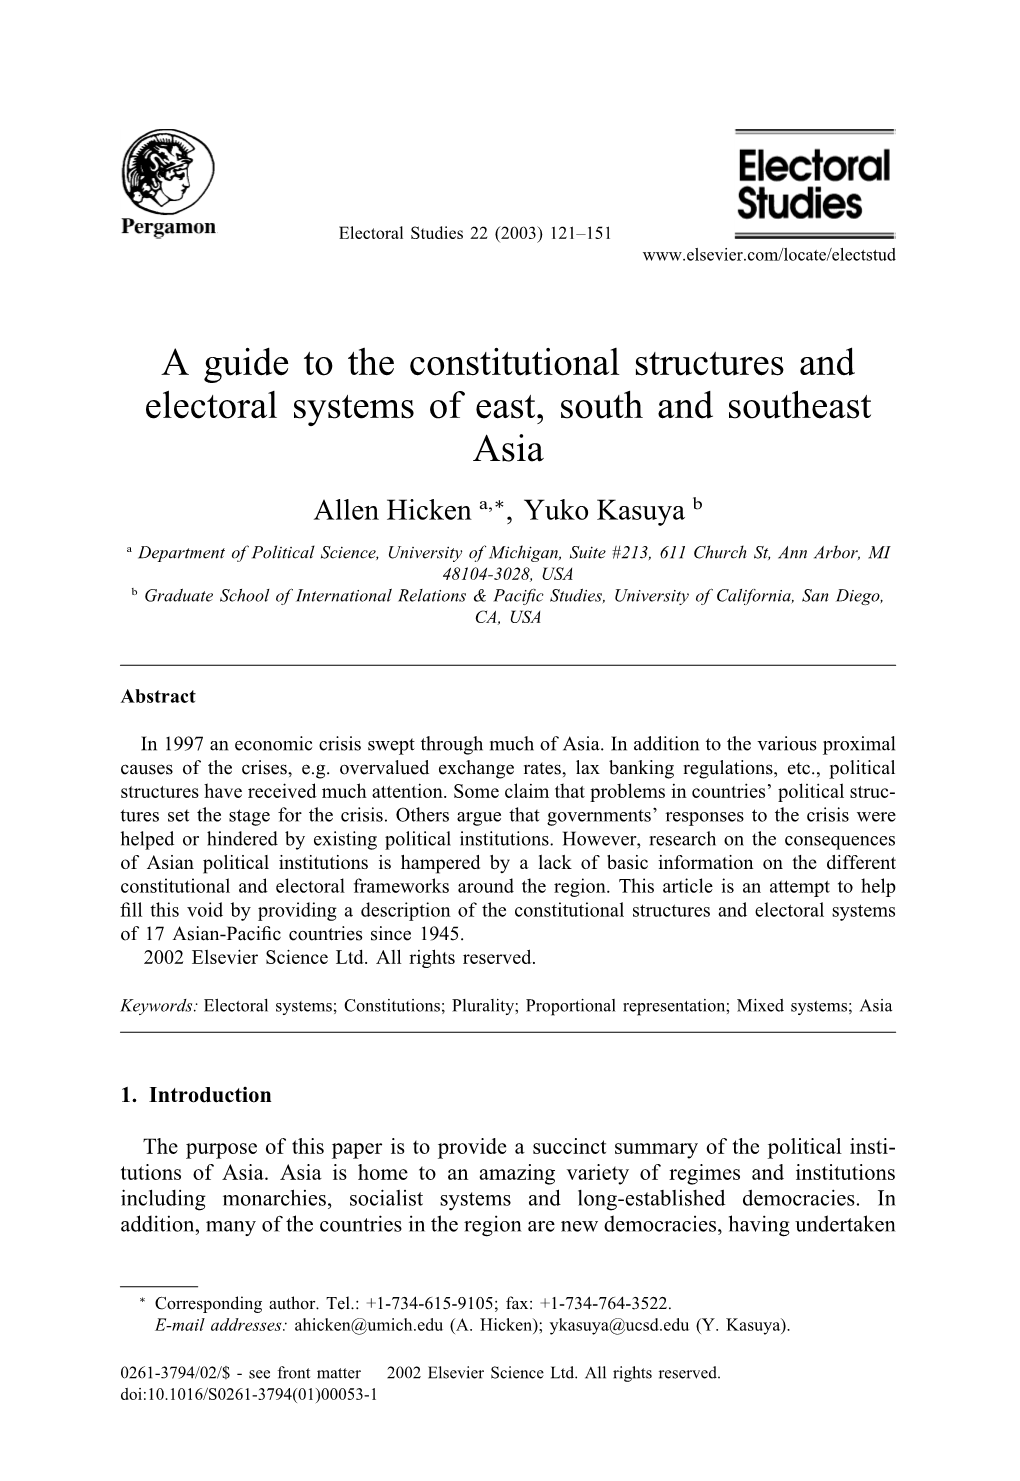 A Guide to the Constitutional Structures and Electoral Systems of East, South